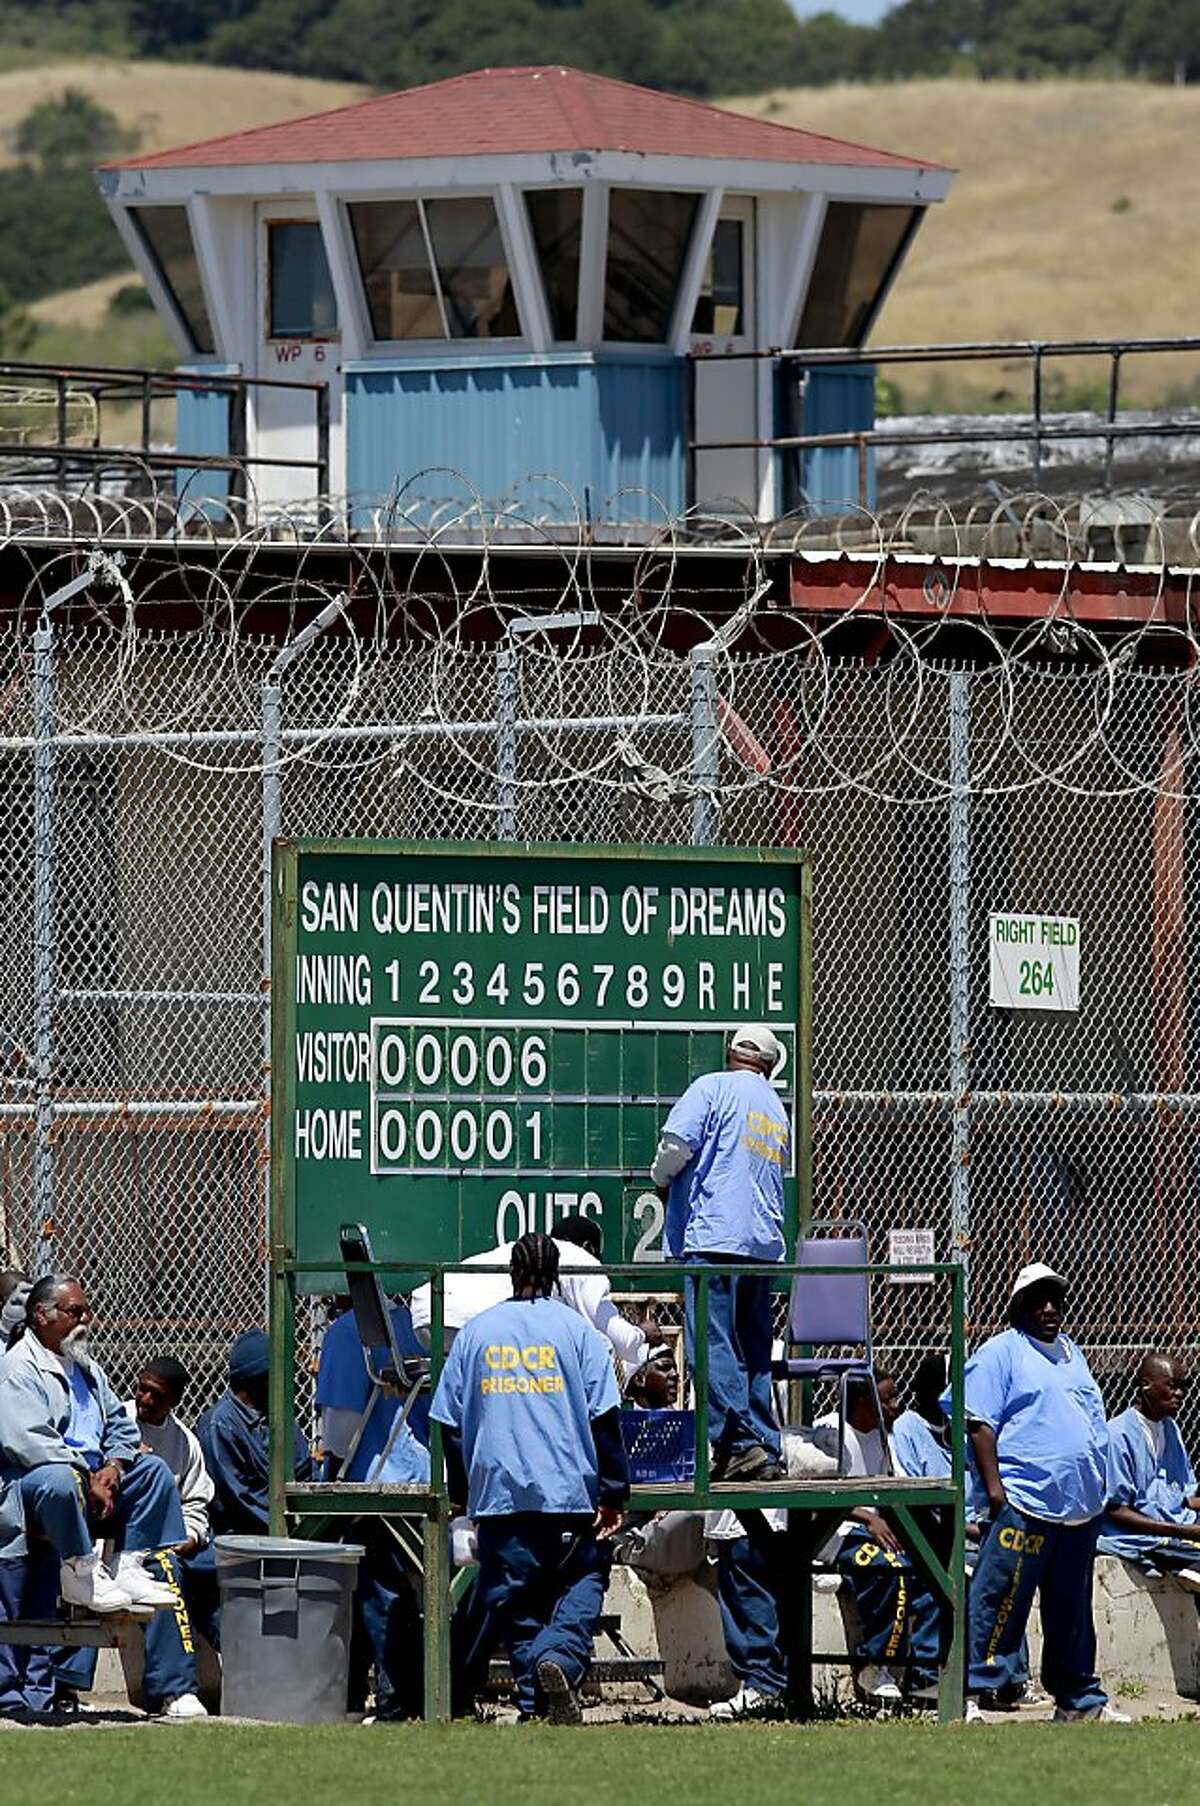 Inmates keeps a close watch and tend to the centerfield score board as the San Quentin Giants play the San Rafael Pacifics in a game at San Quentin prison in San Rafael, Calif. on Sat. May 18, 2013. The San Rafael Pacifics baseball club take on the San Quentin Giants at historic San Quentin prison as the Pacifics went on to finish the day with a spring training victory beating the Giants 17-3.